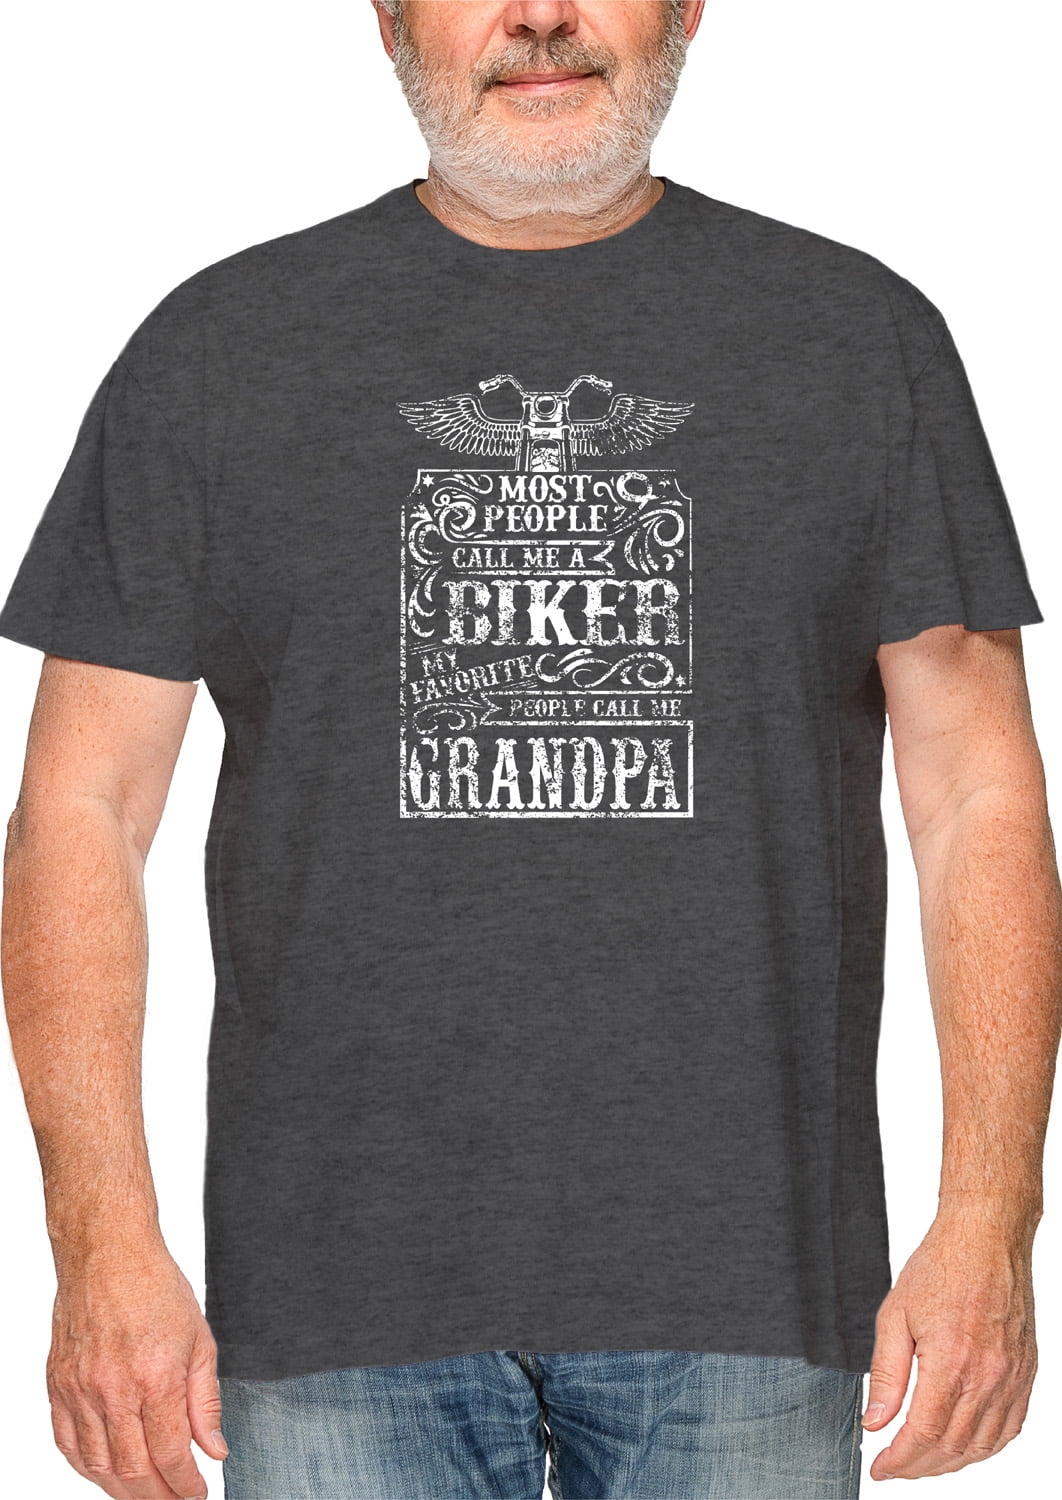 Feisty and Fabulous - Awesome Gift for Tough Grandpa, Biker Grandpa ...